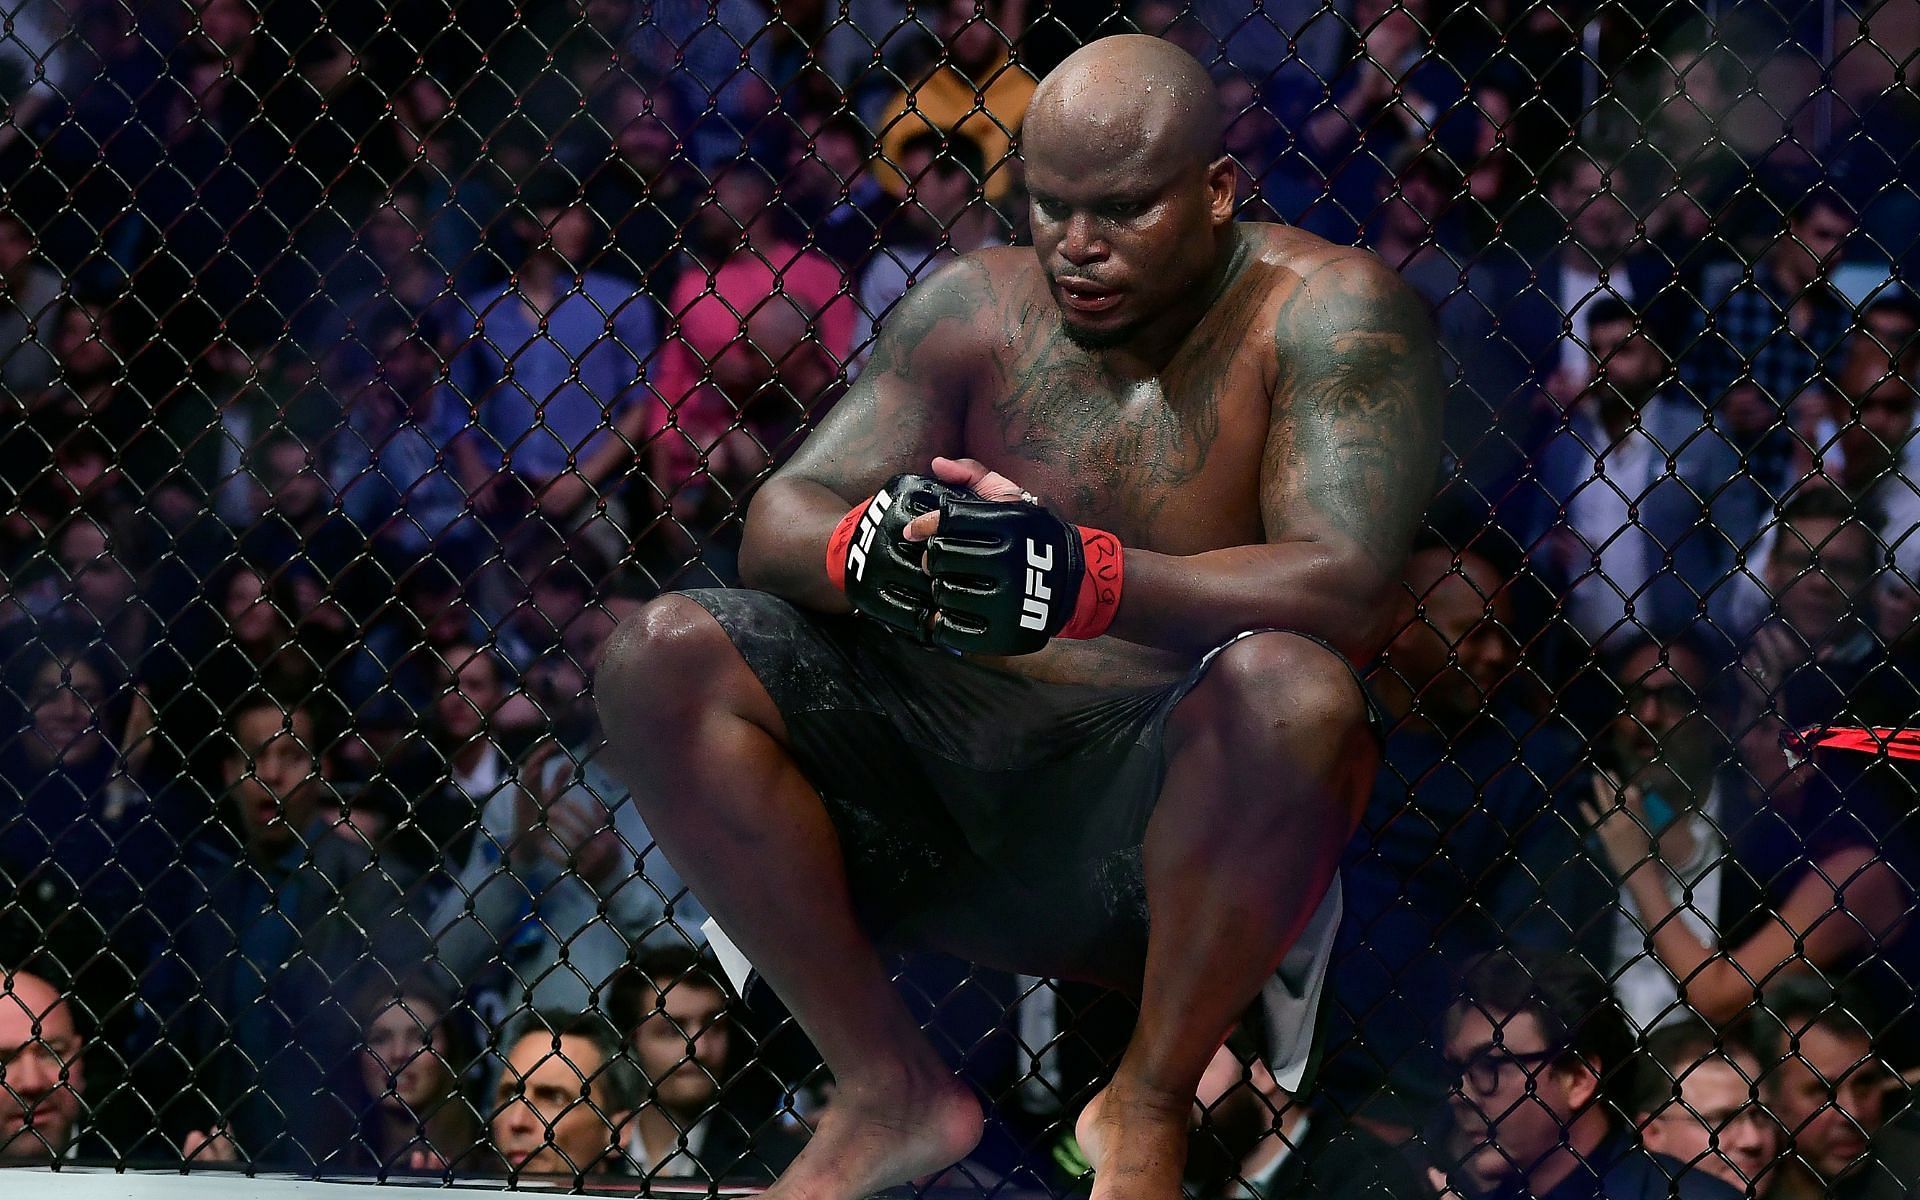 Number three heavyweight contender Derrick Lewis at UFC 244 in New York City on November 2, 2019